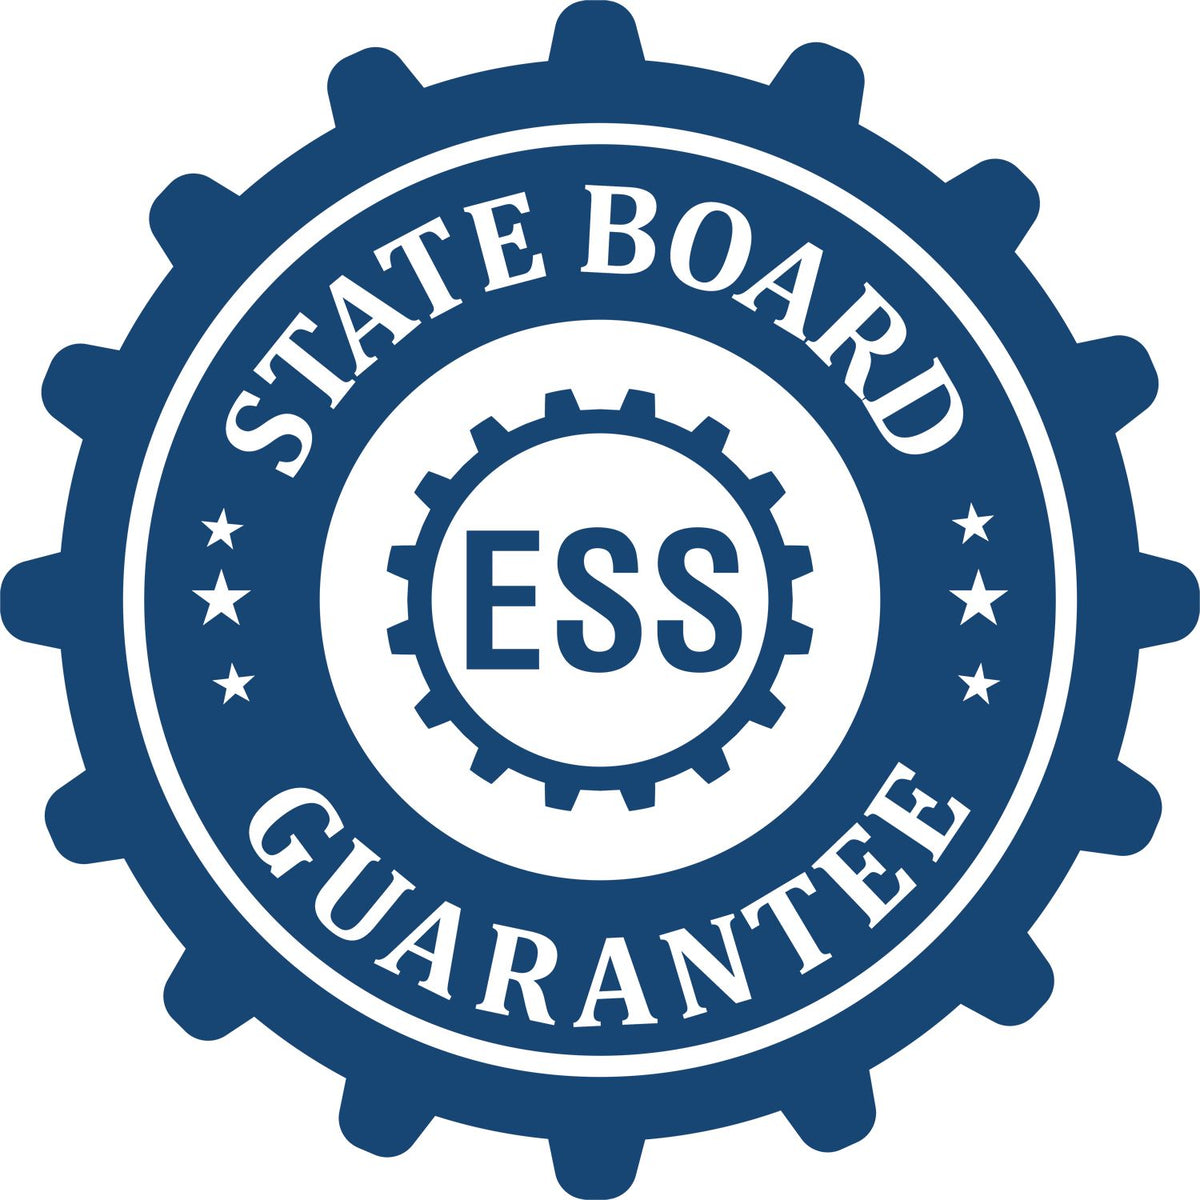 An emblem in a gear shape illustrating a state board guarantee for the Soft Pocket Maine Landscape Architect Embosser product.